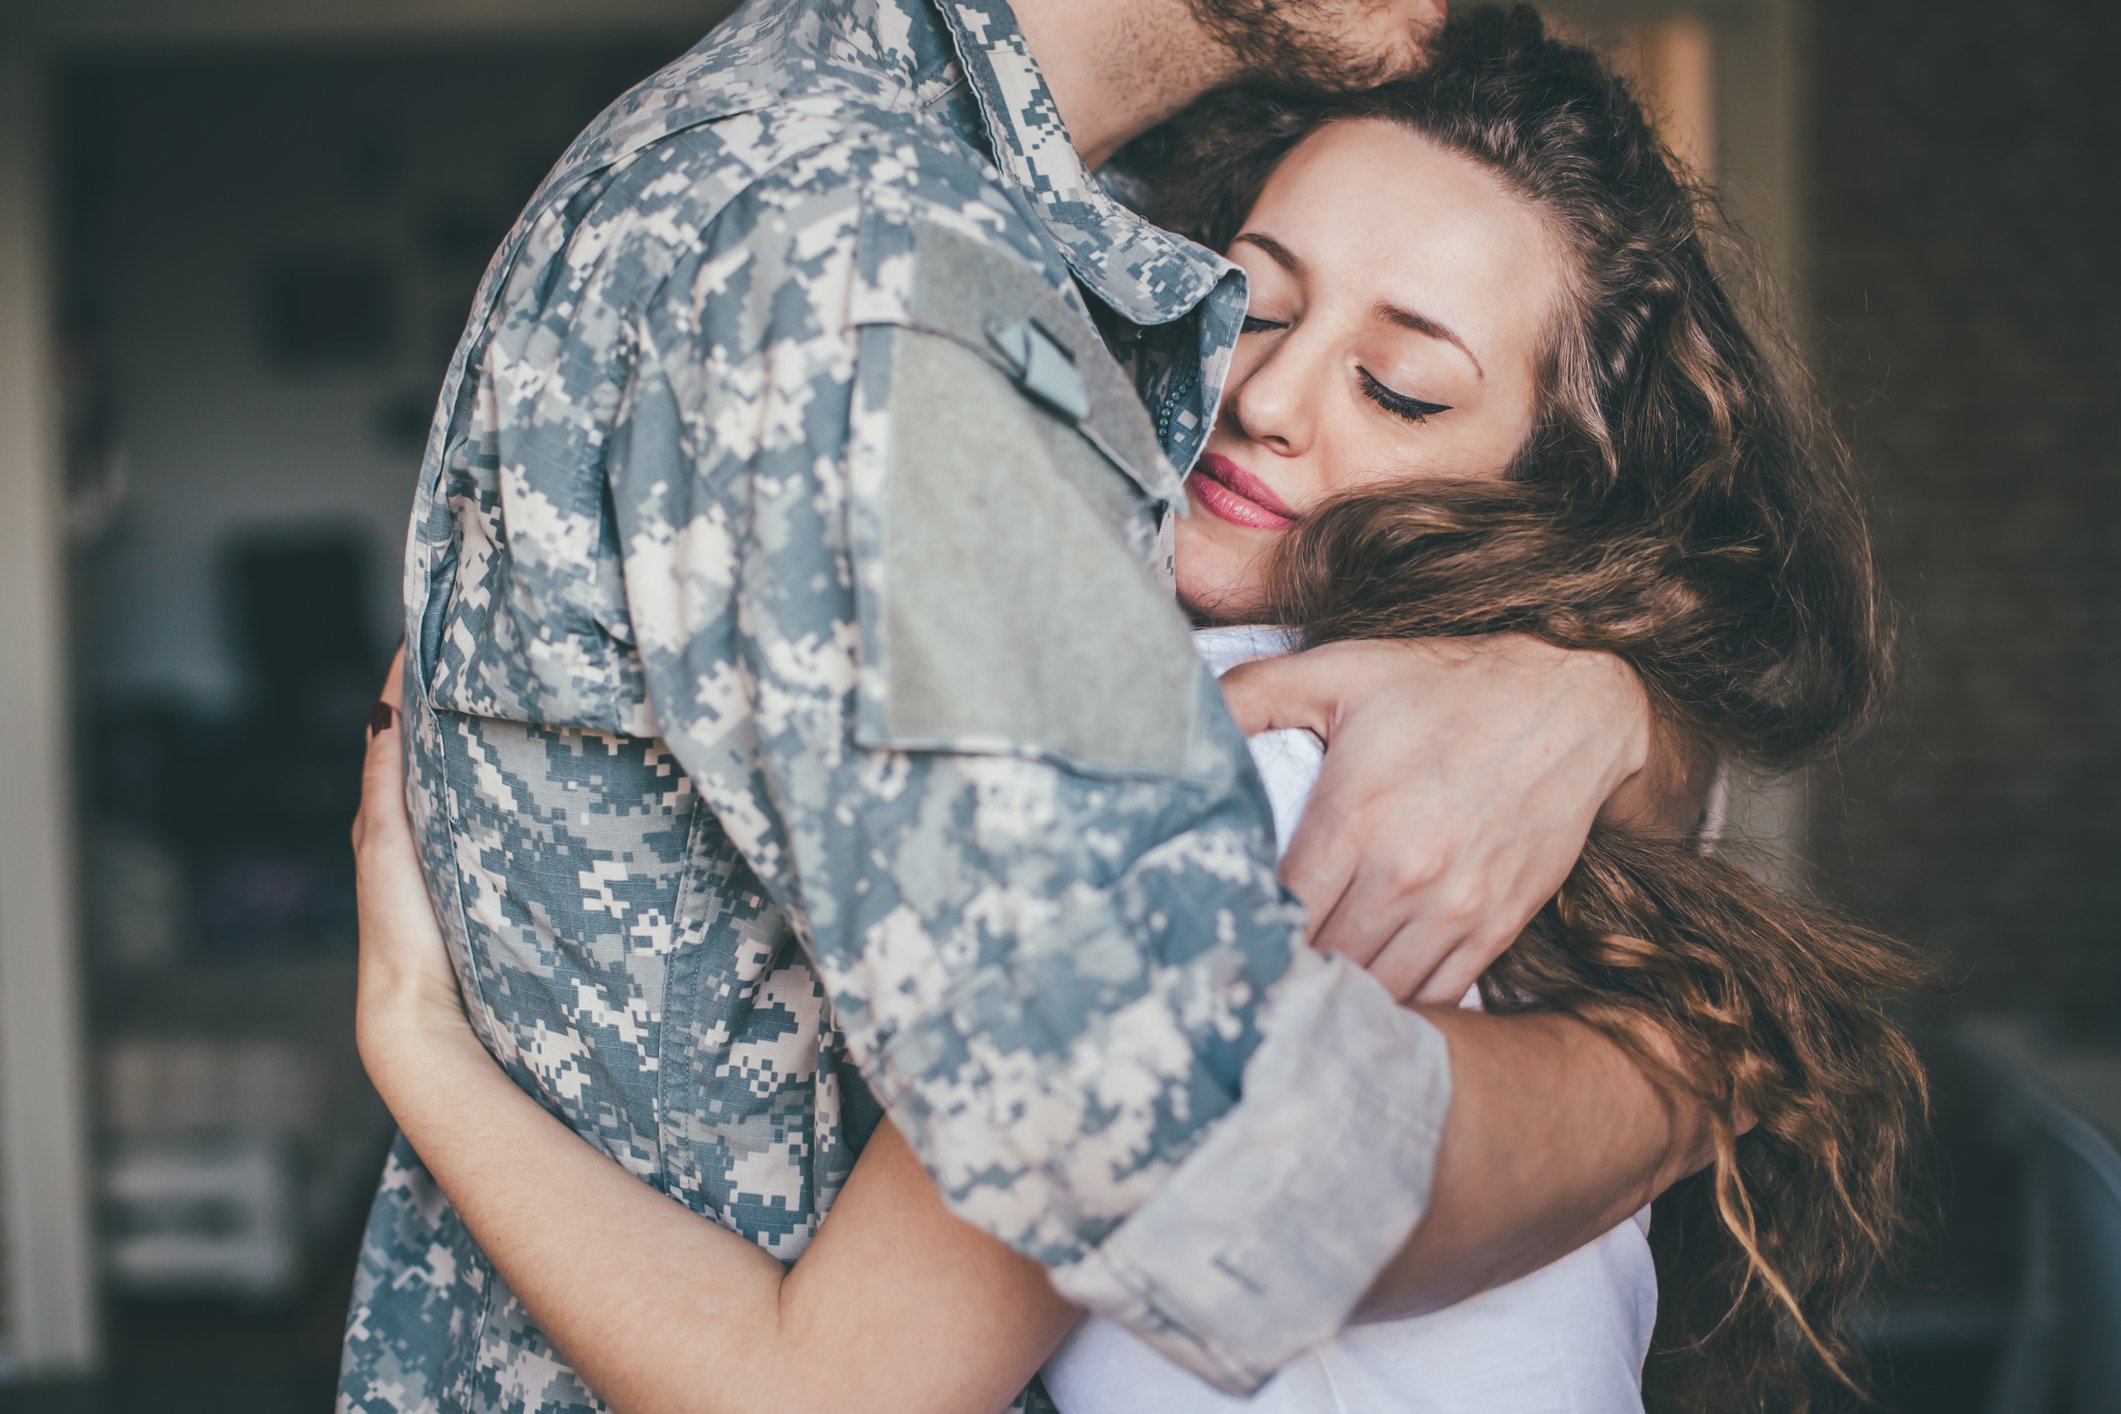 Keys to a military marriage